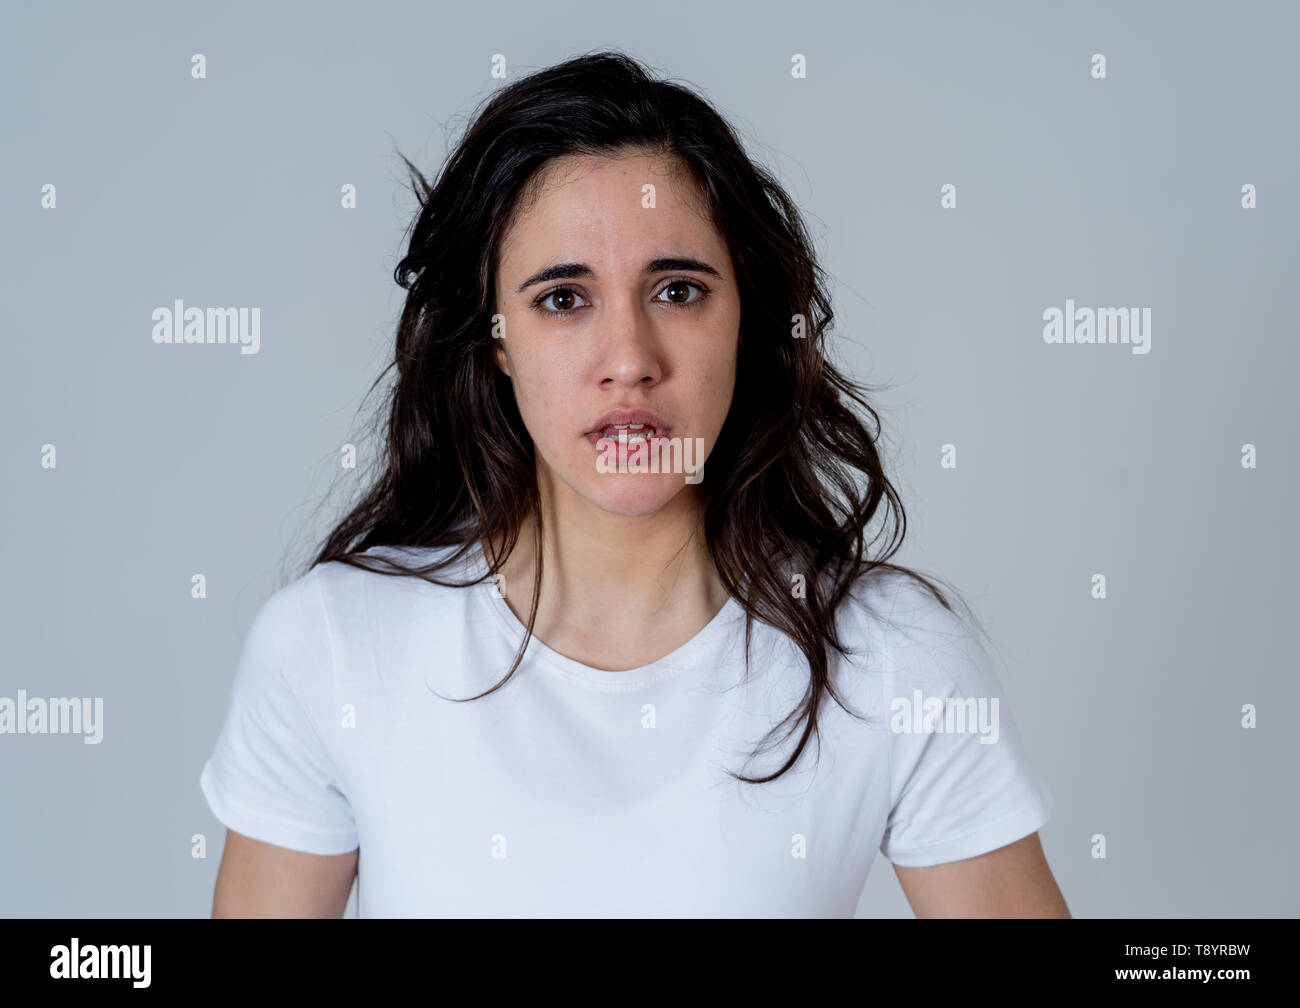 Young latin woman feeling disgust looking at something unpleasant making fear, anxiety gestures trying to cover herself in shock. Portrait with copy s Stock Photo